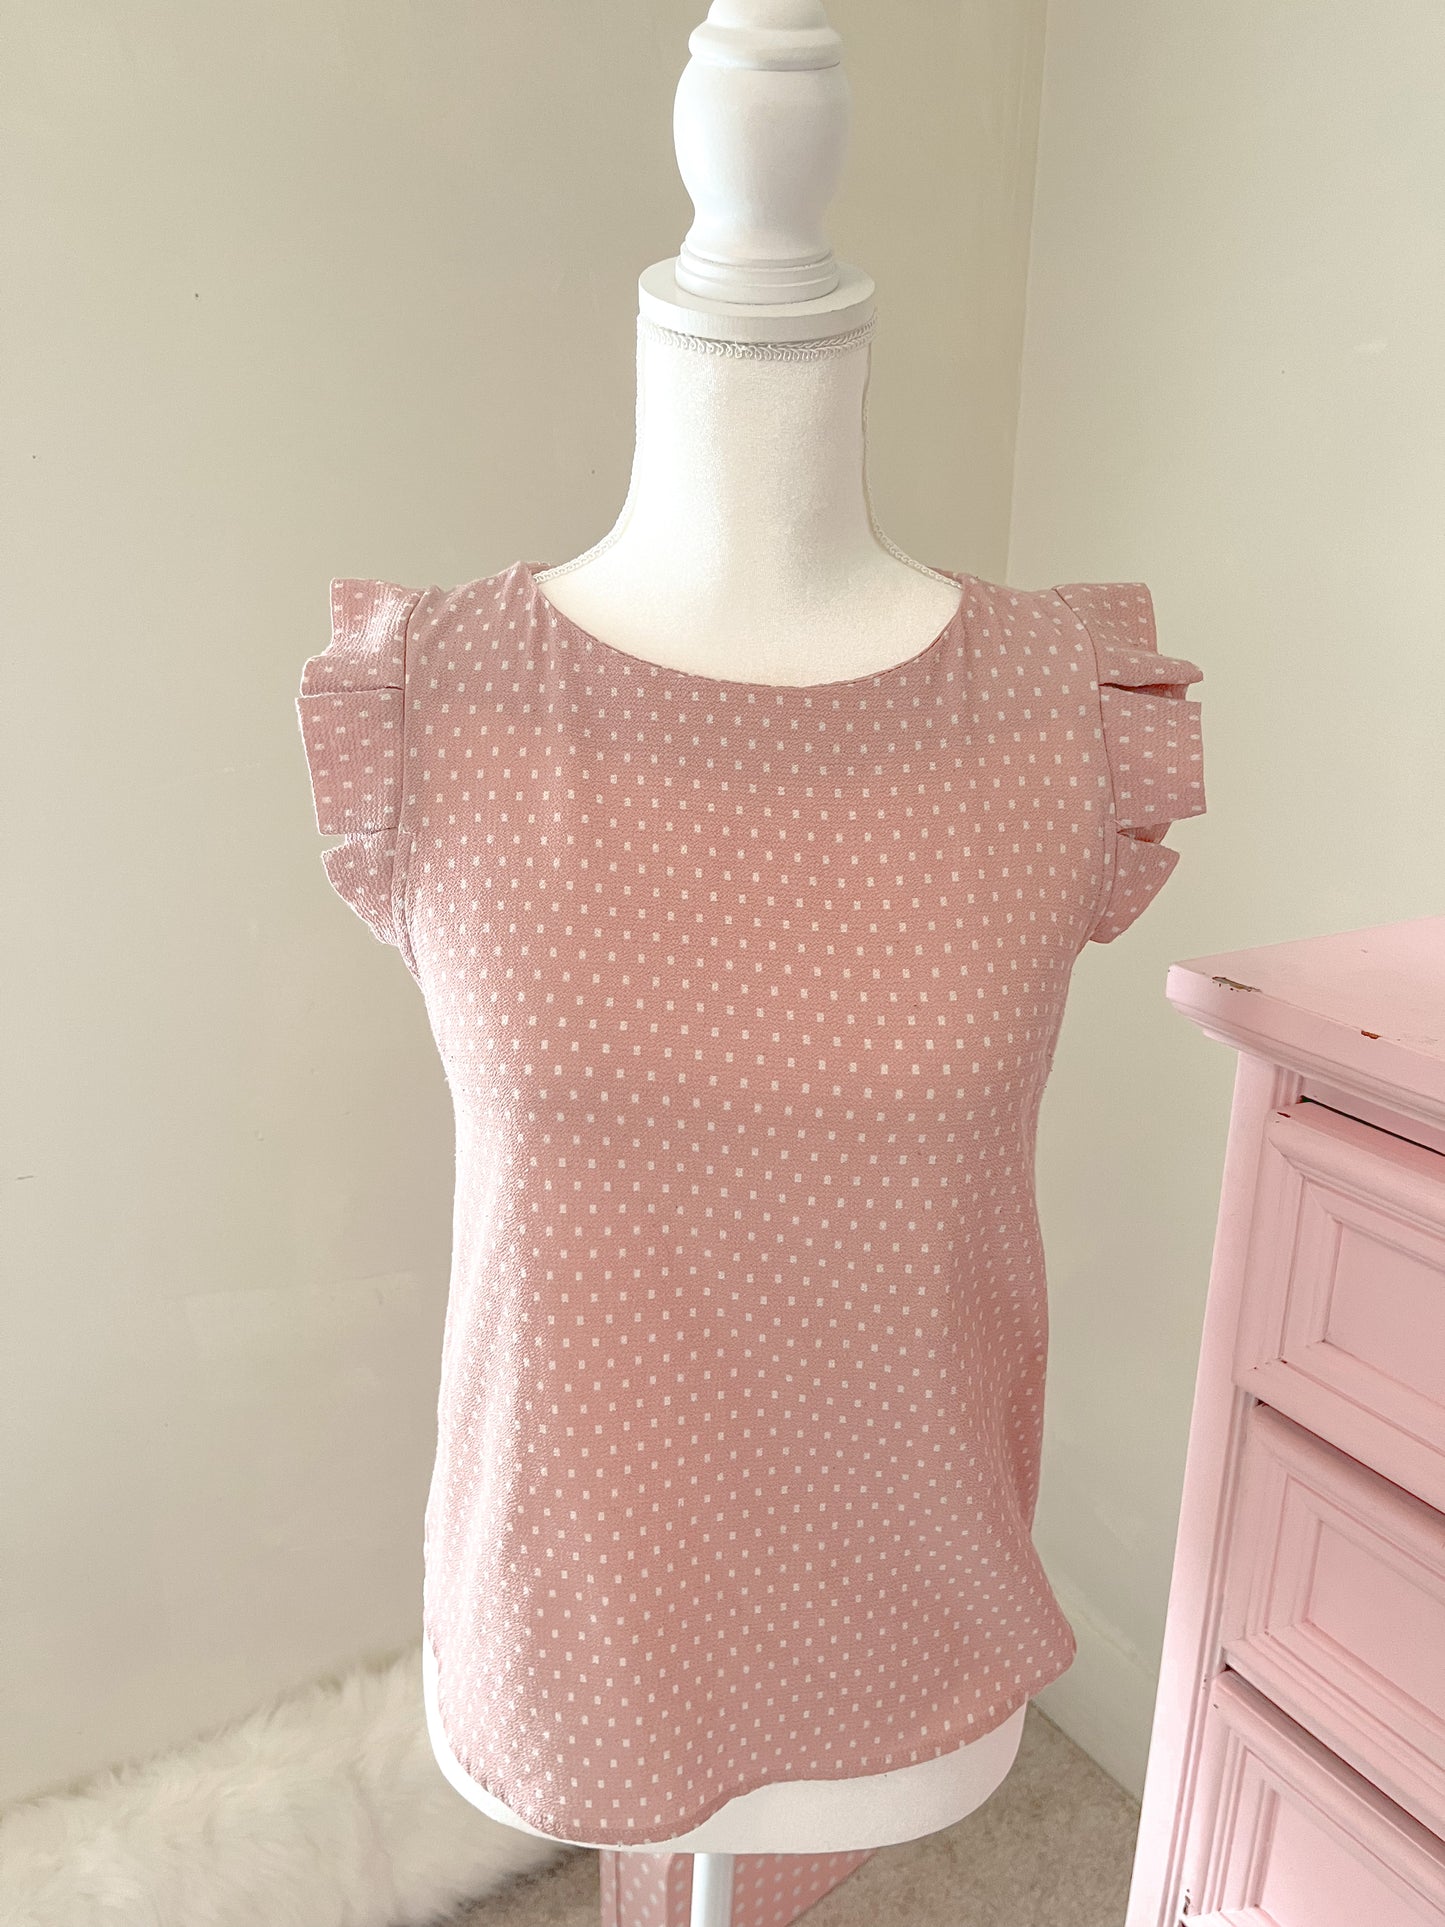 Mauve Pink Chic Top size small